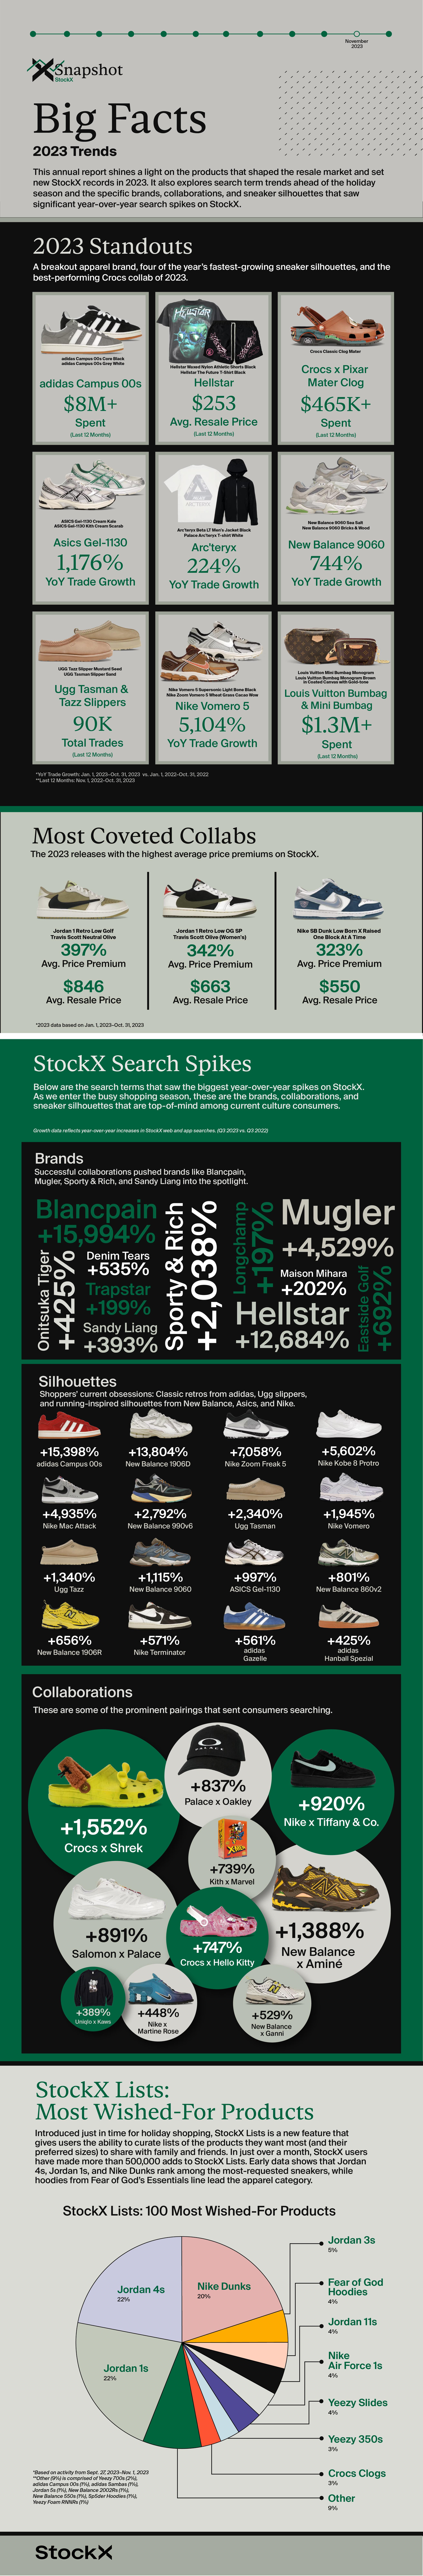 Big Facts: 2023 Trends - StockX